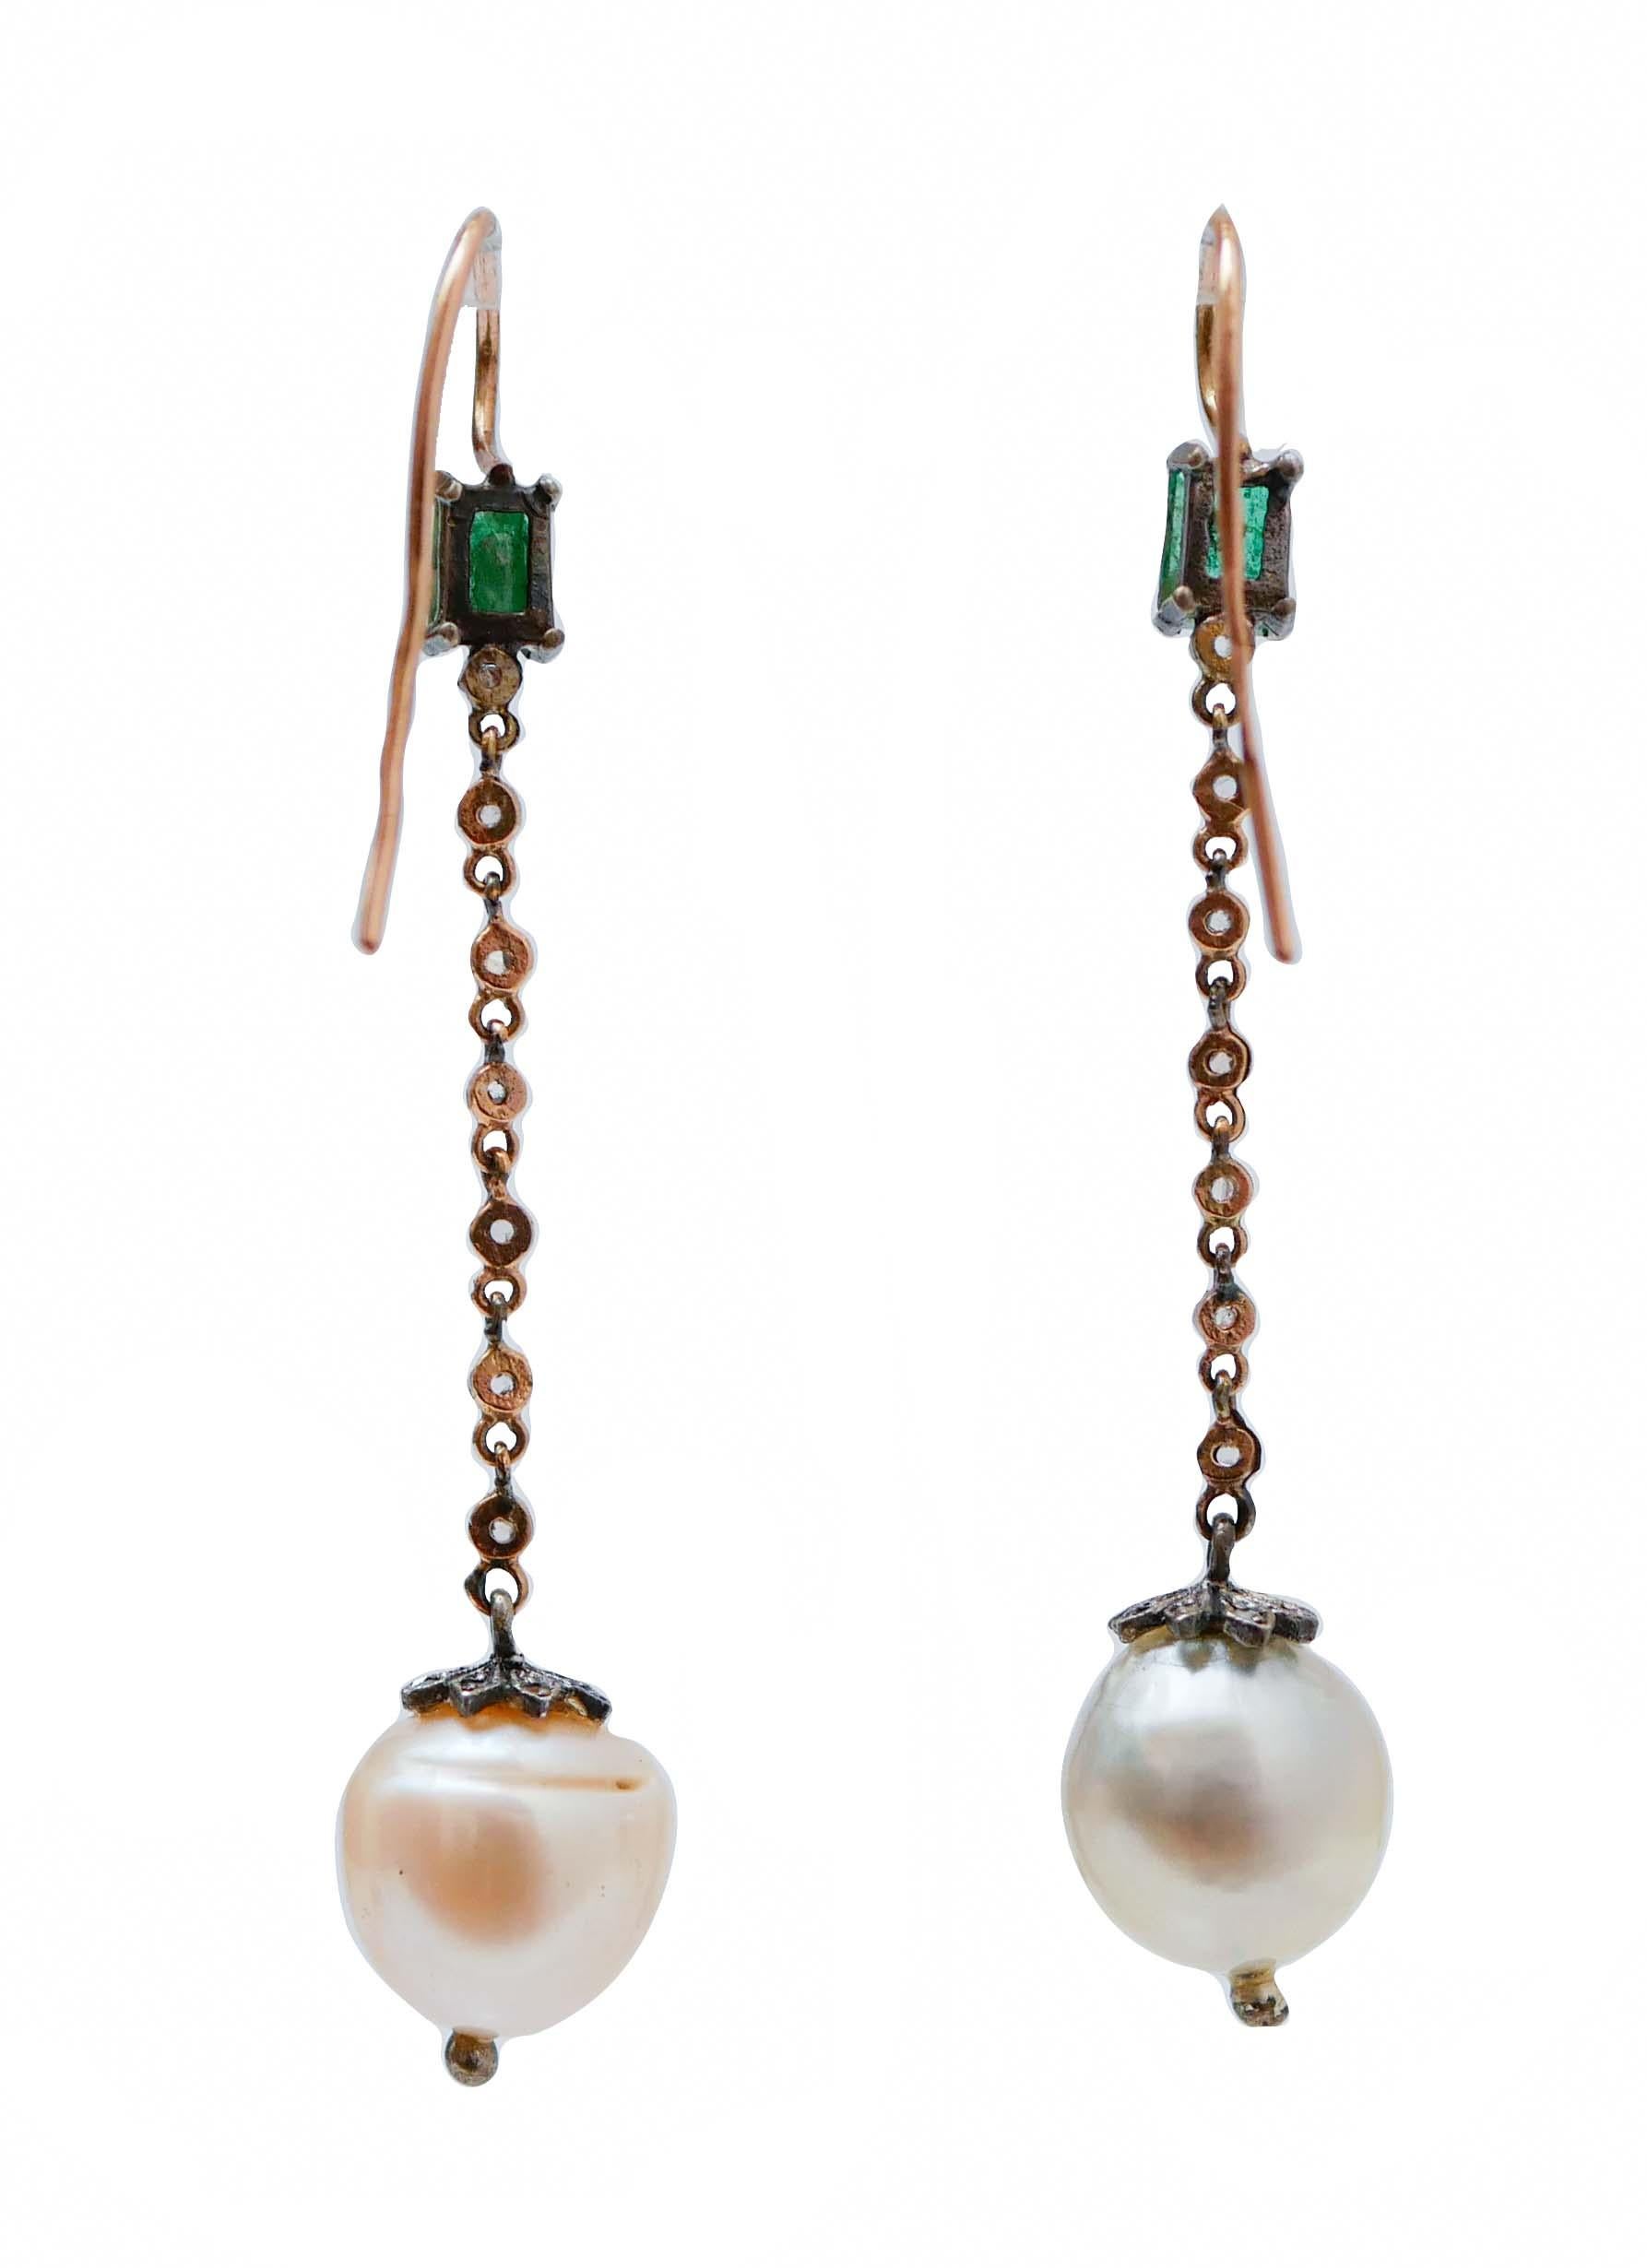 Retro Pearls, Emeralds, Diamonds, Rose Gold and Silver Dangle Earrings. For Sale